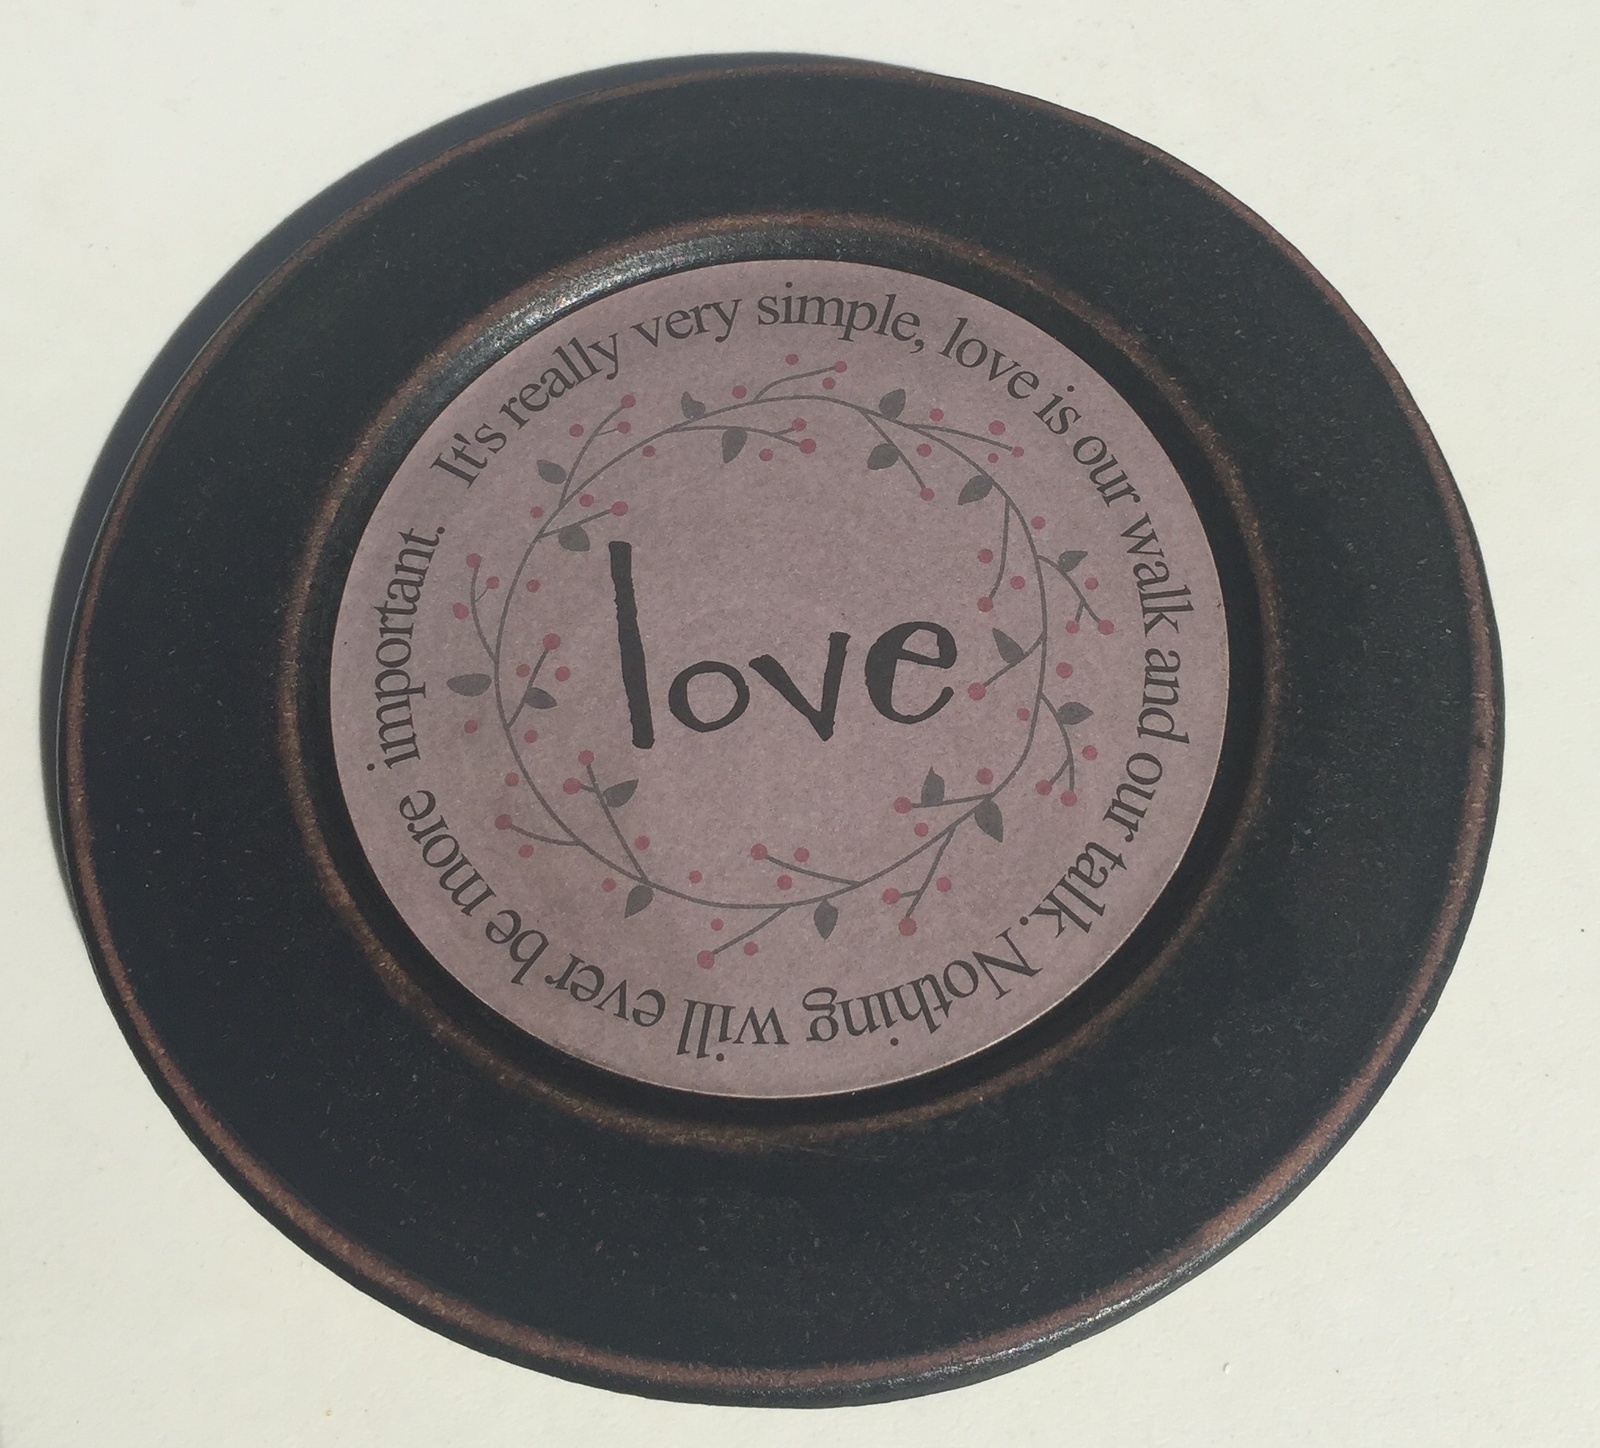  33082L  Wood Plate Love - It's really very simple, love is our walk and our tal - $10.95